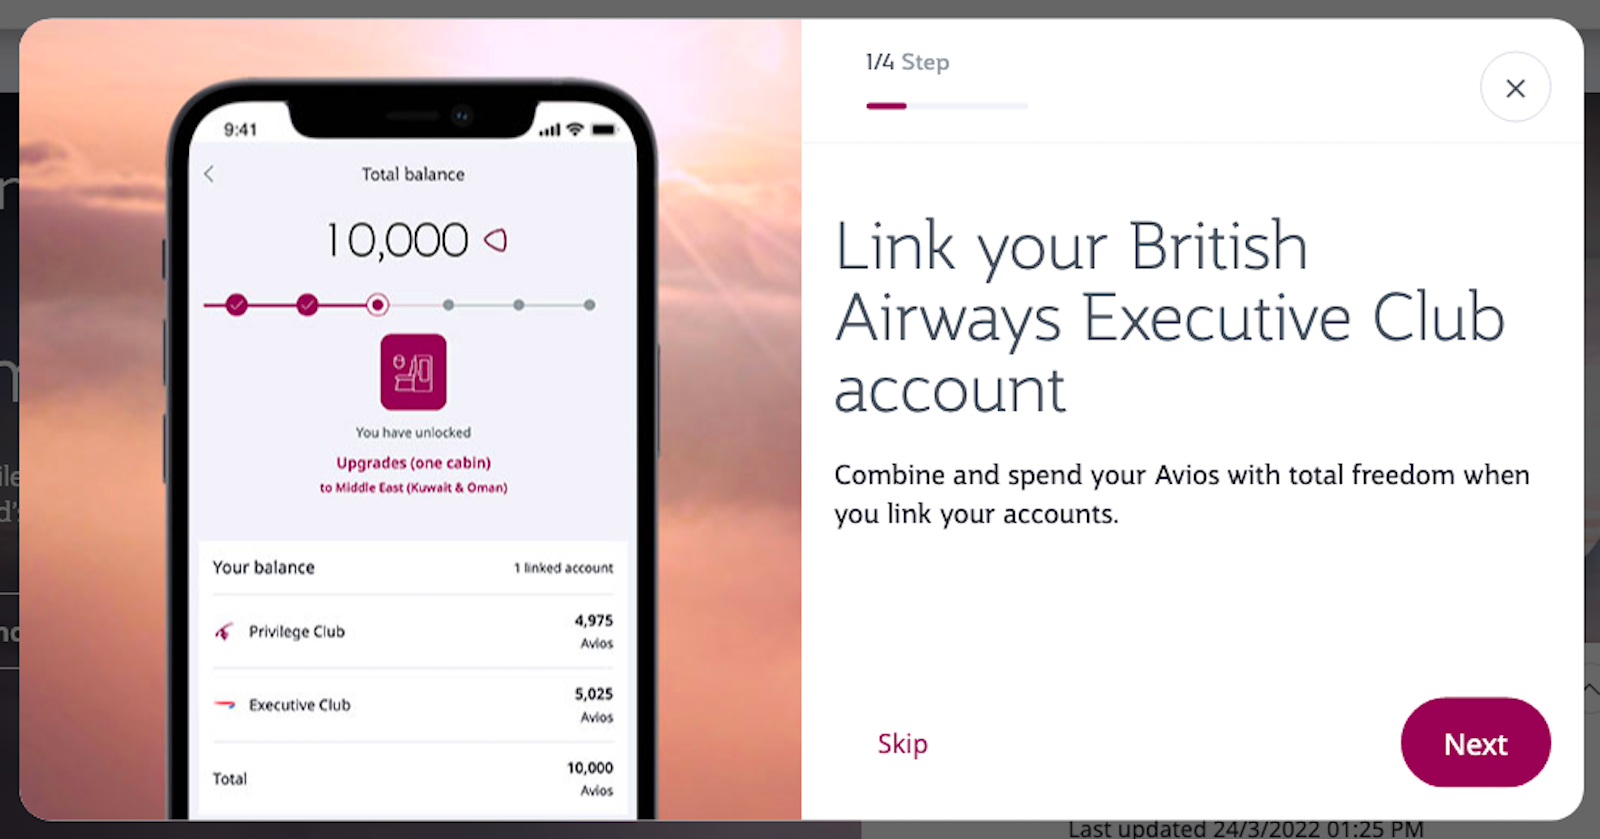 Screenshot shows a pop-up prompting me to link my BA and Qatar accounts